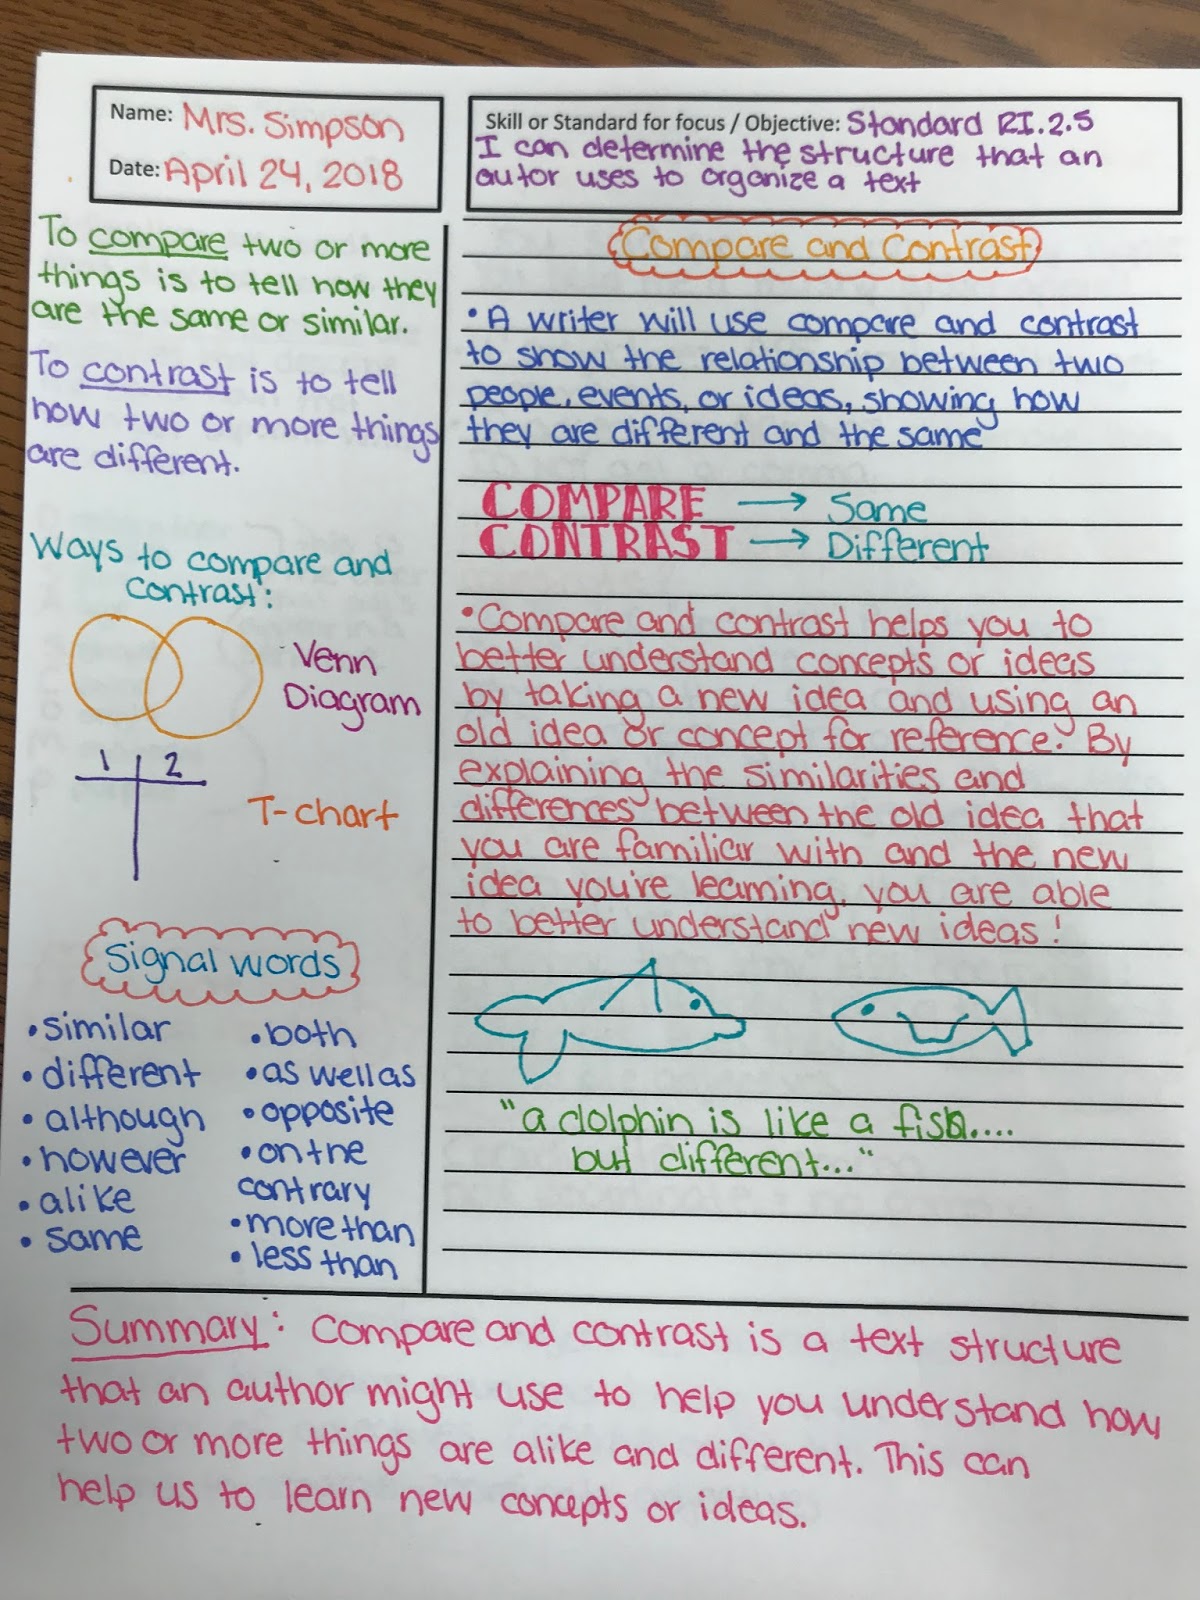 the-ultimate-guide-to-taking-studying-cornell-notes-studystuff